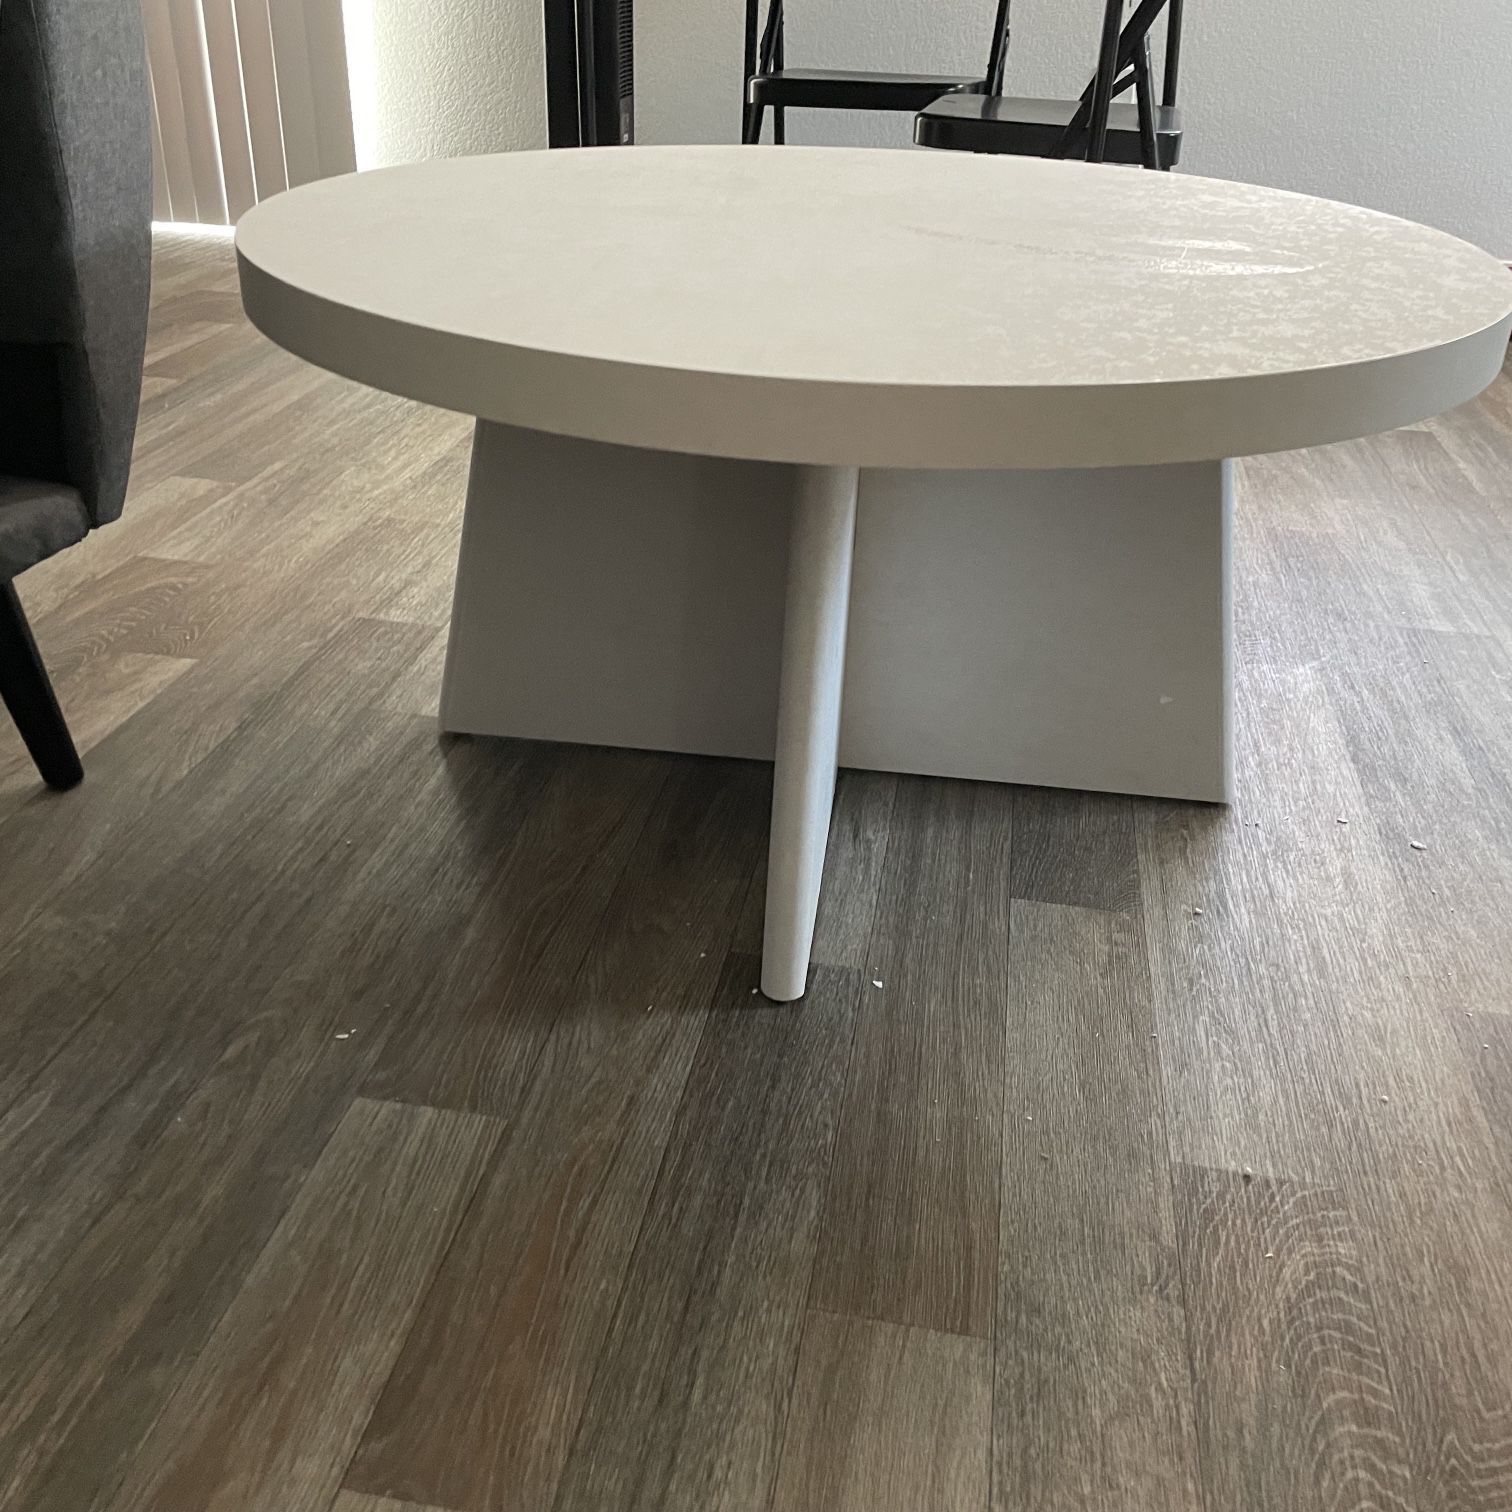 Queer Eye Liam Round Coffee Table For Sale In North Las Vegas, Nv – Offerup With Liam Round Plaster Coffee Tables (Photo 12 of 15)